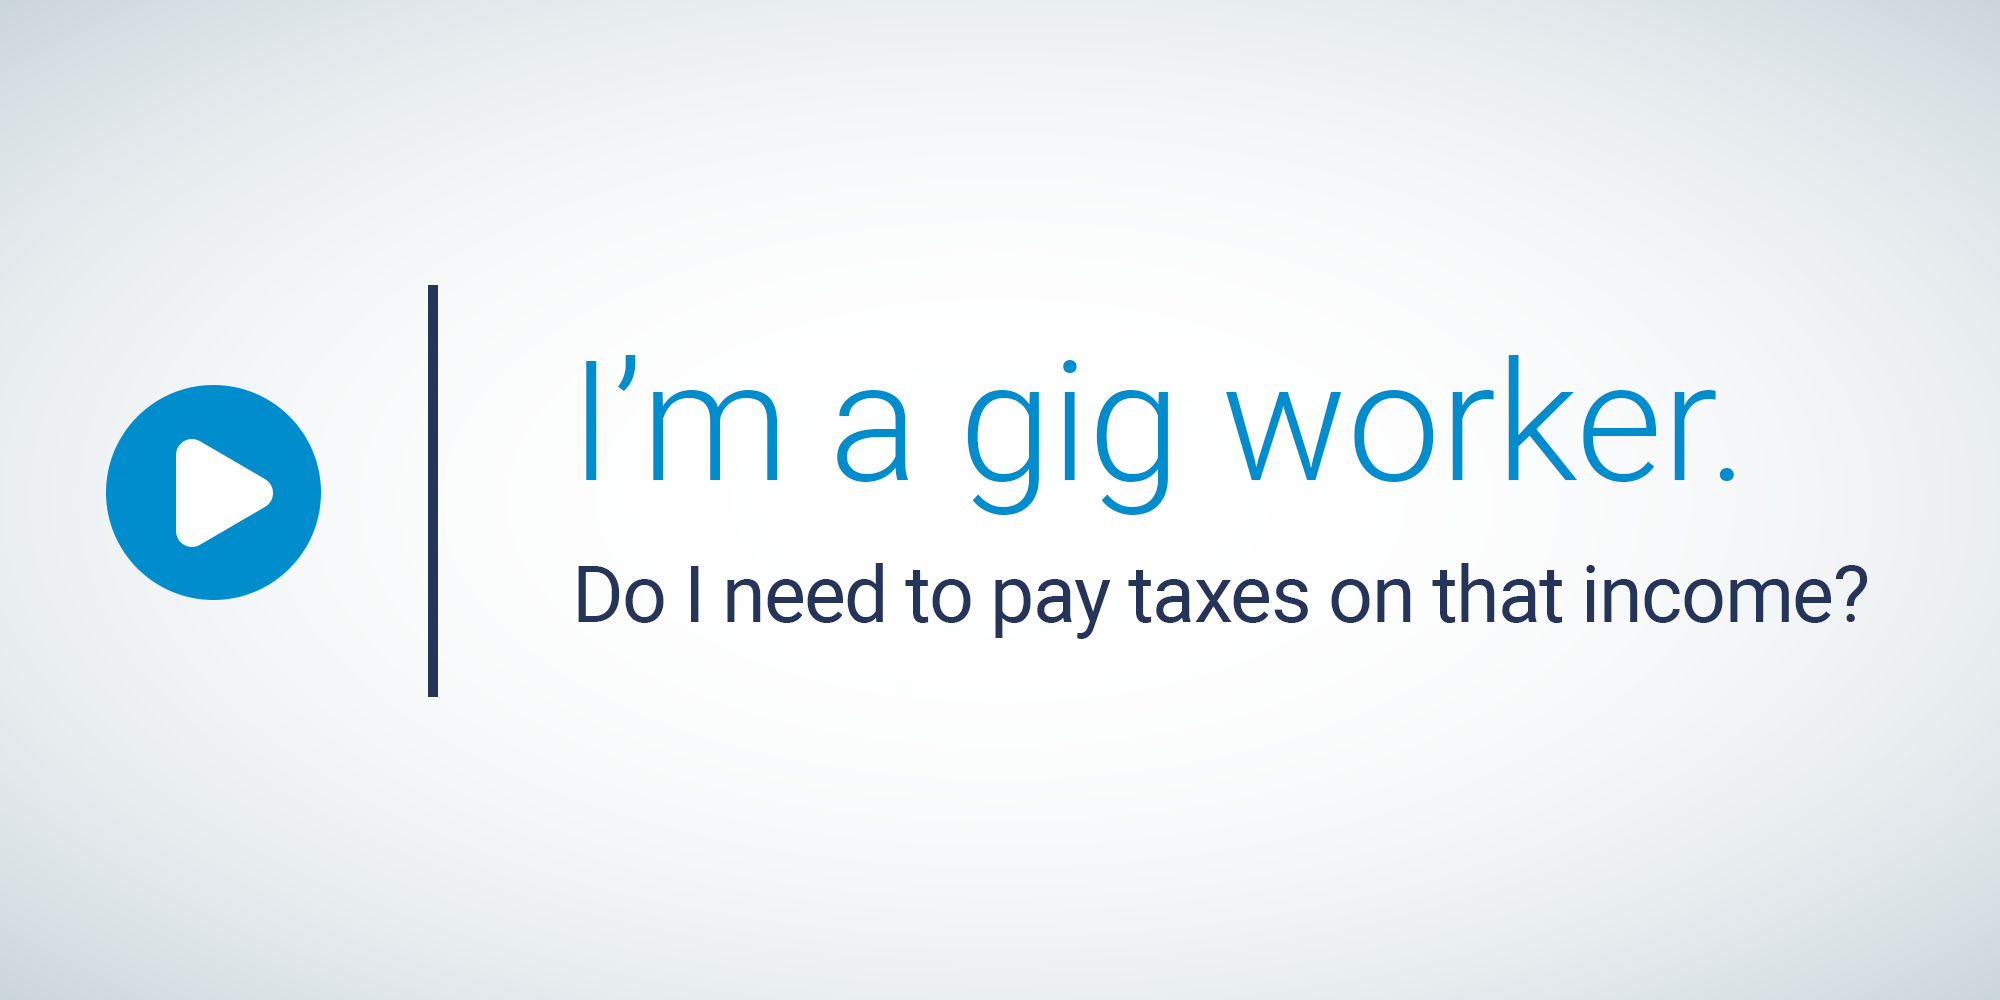 Image associated with gig economy worker web page